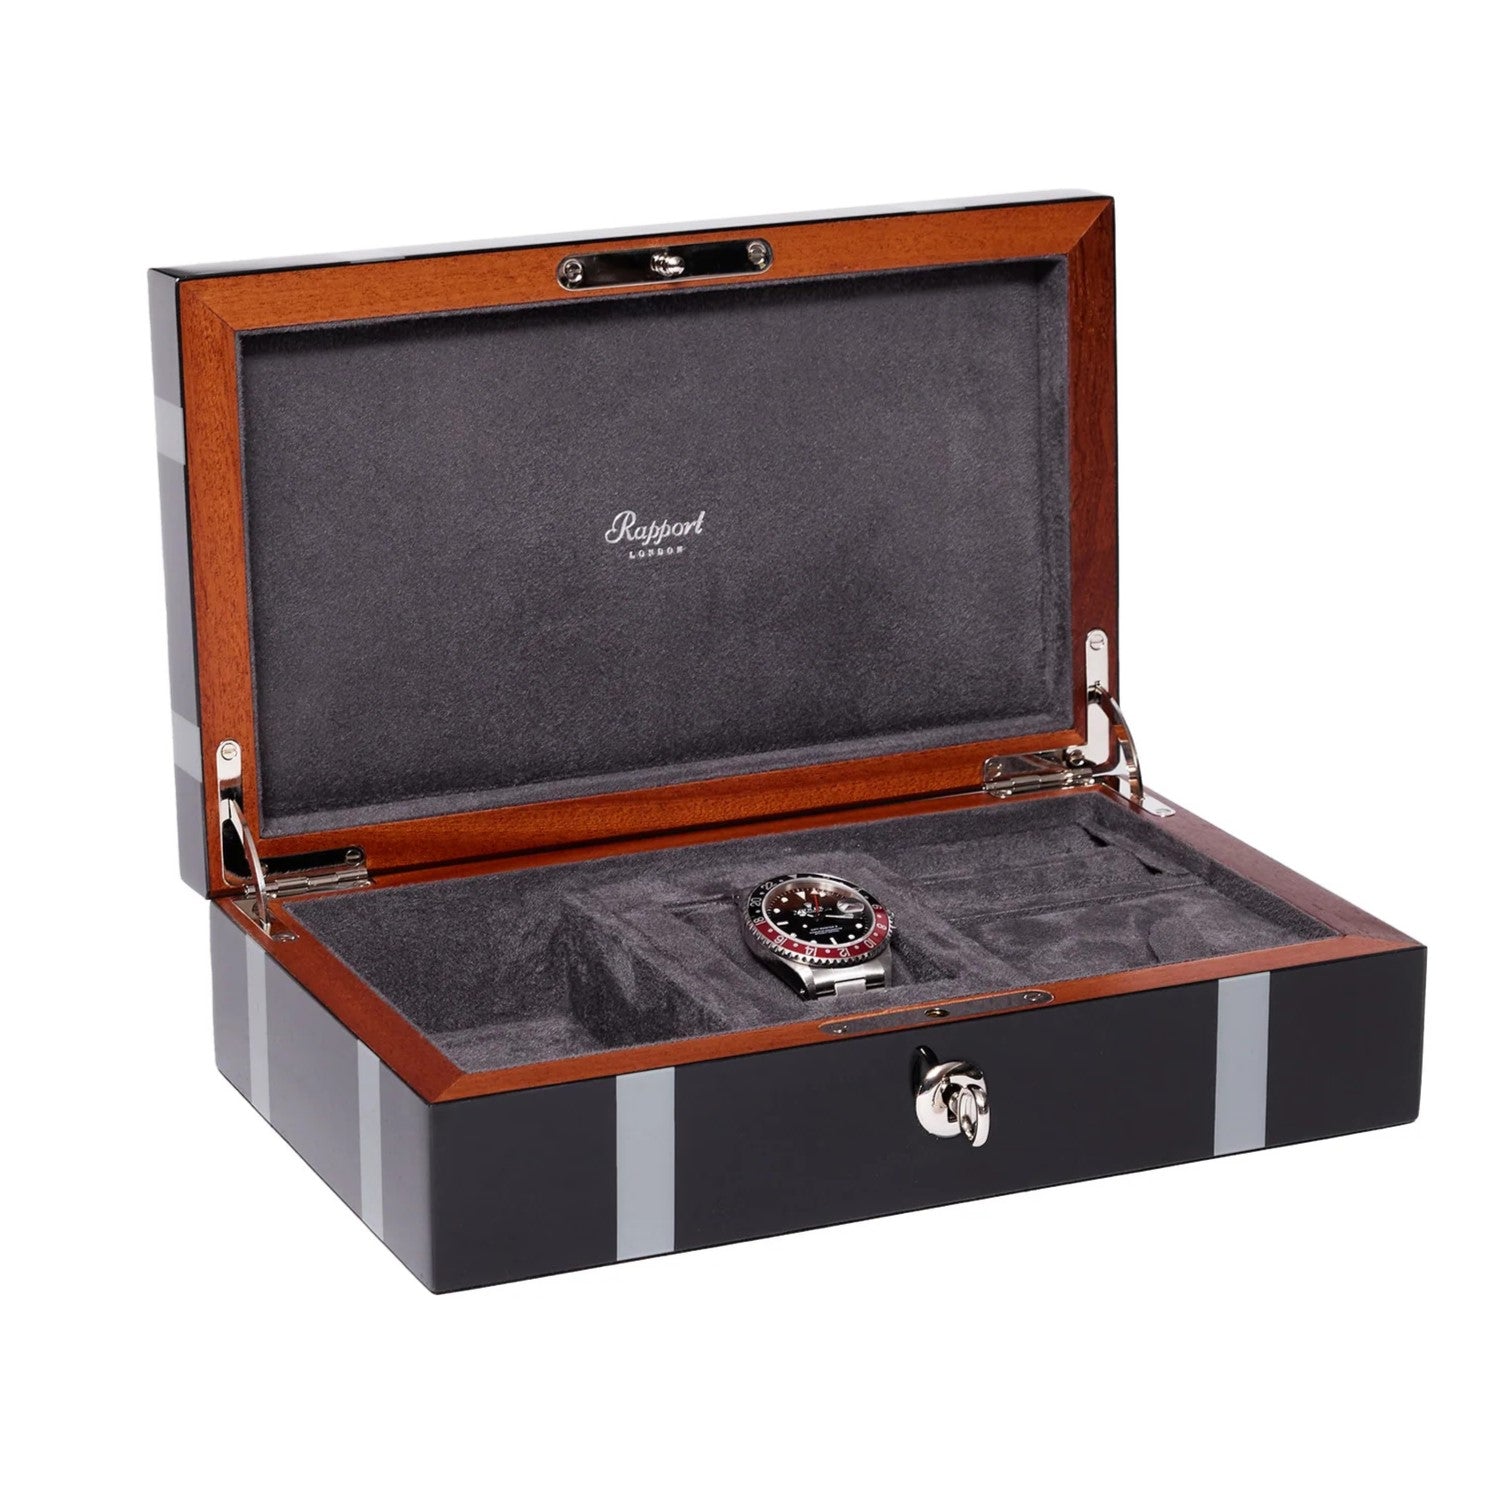 Rapport - Carnaby Multi-Storage Watch Box in Black Lacquer | J165